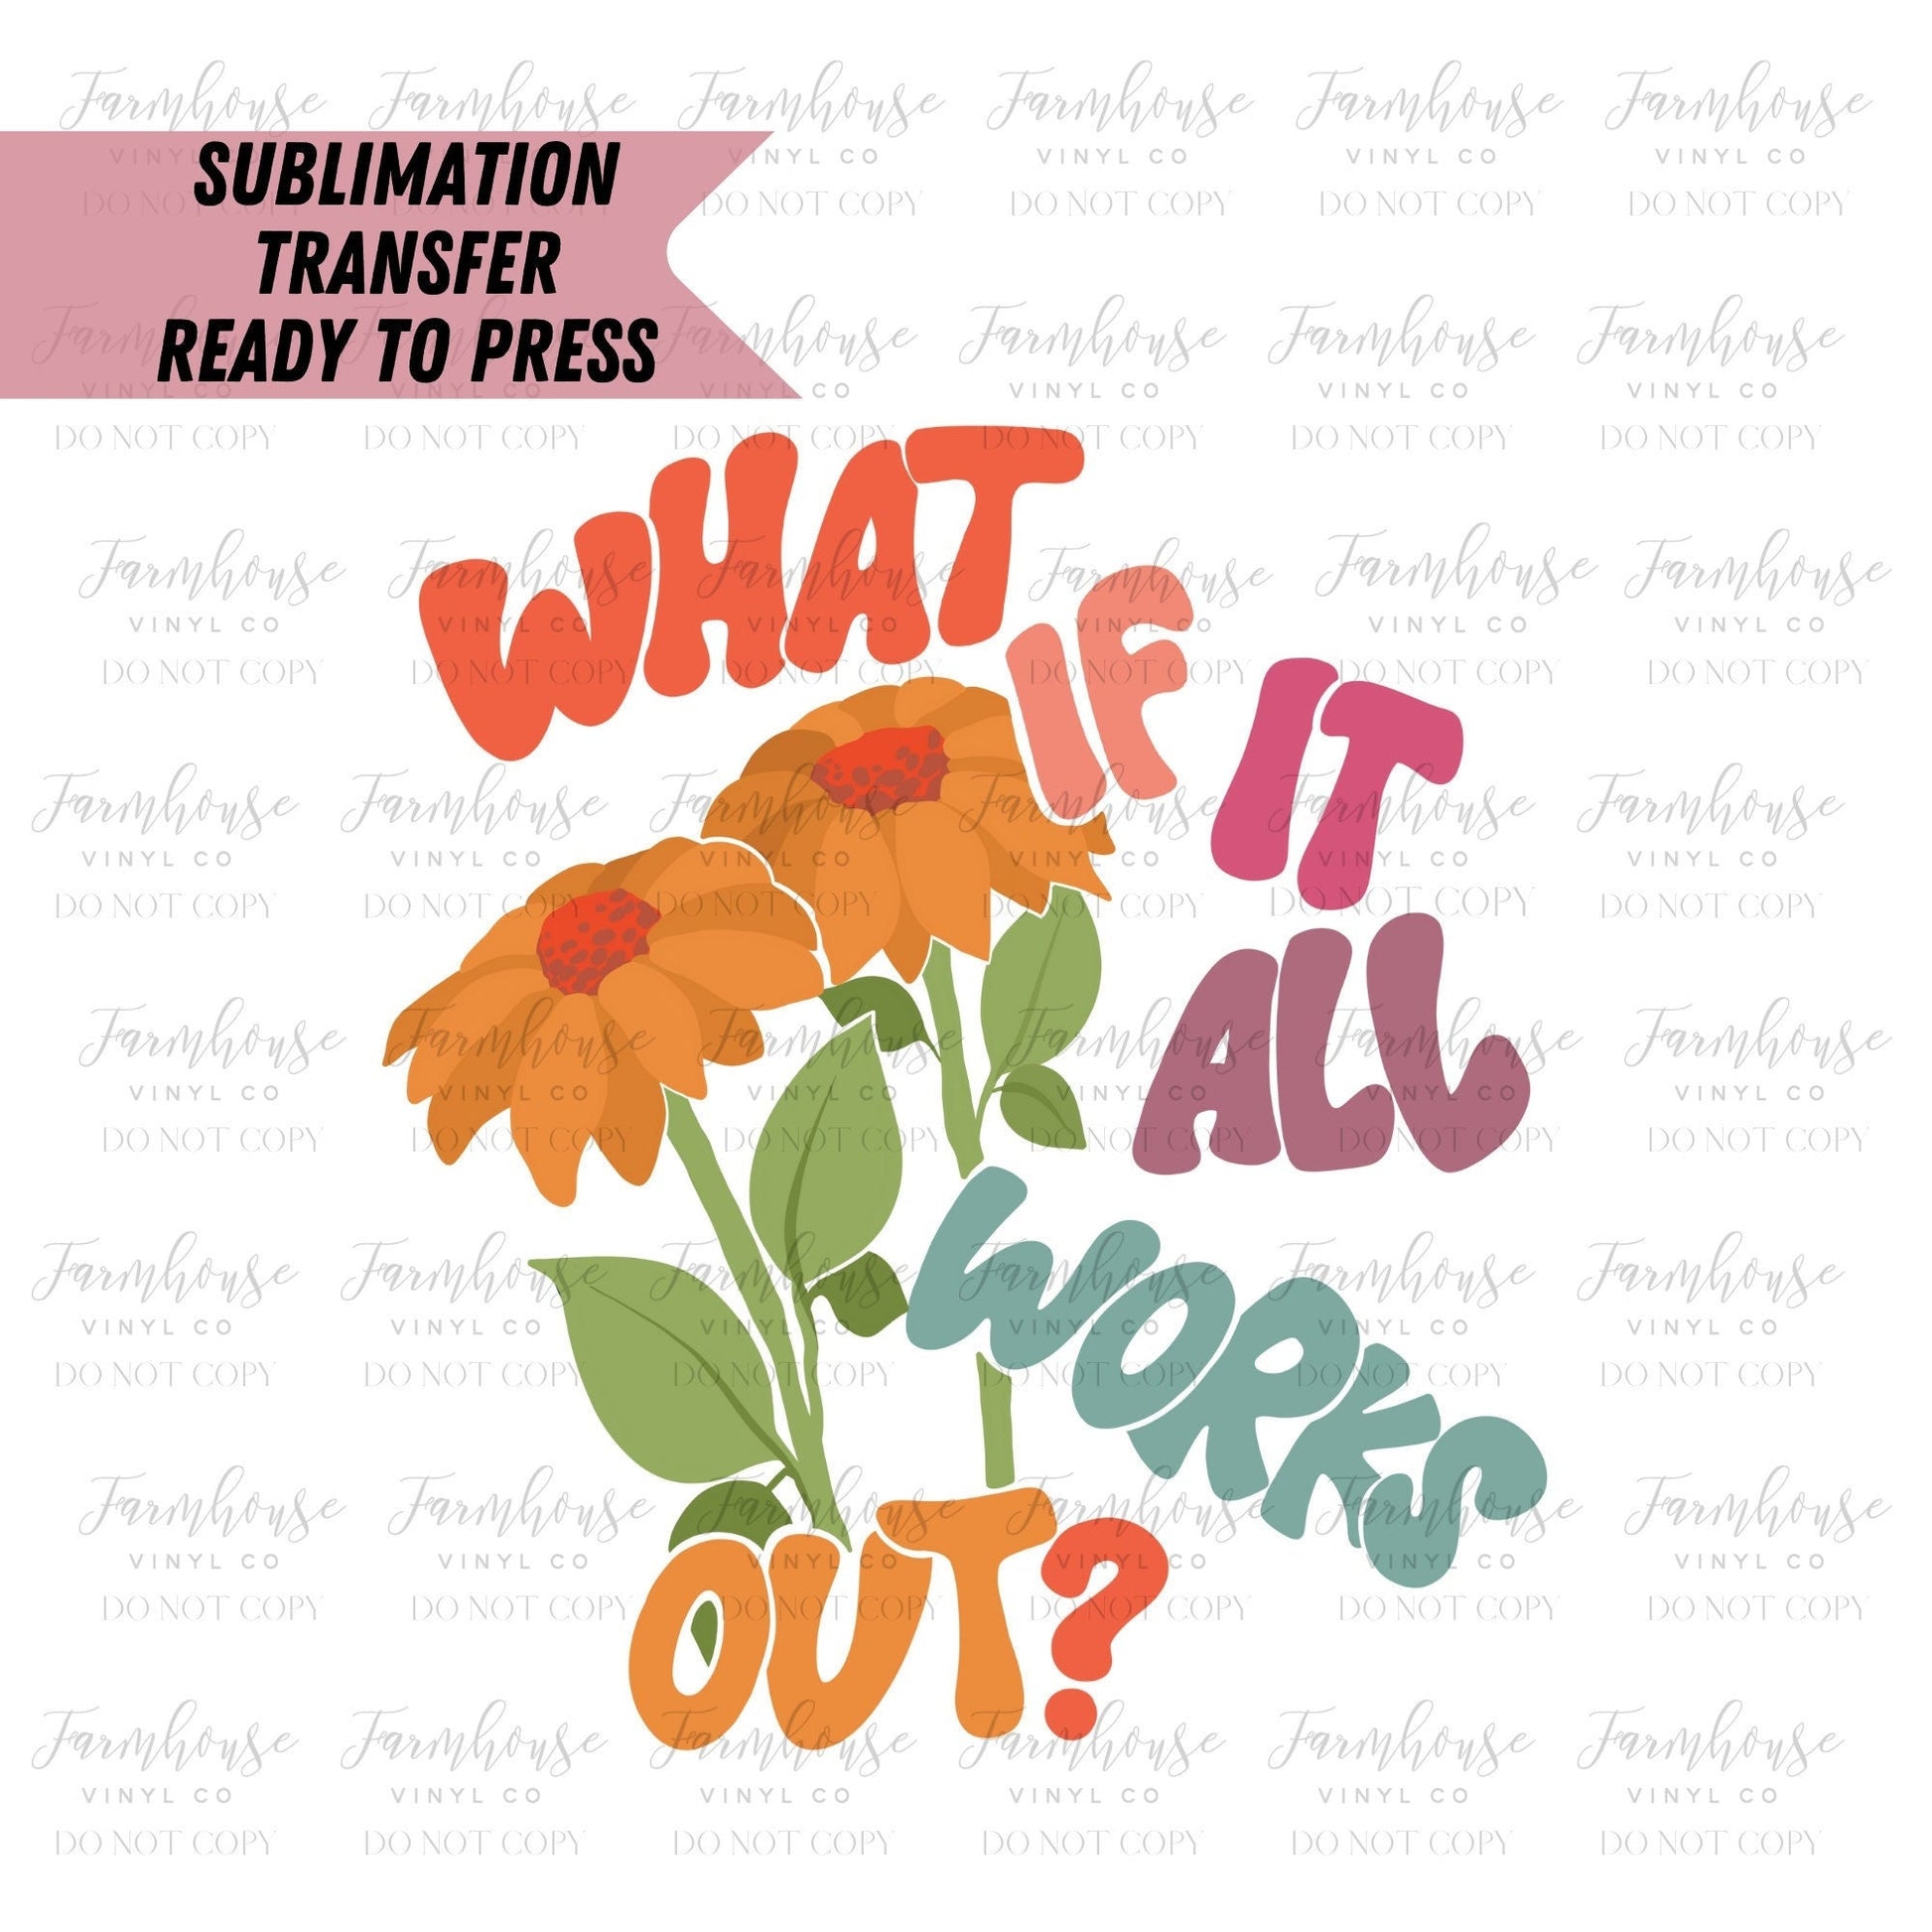 What If It All Works Out Design, Ready To Press, Sublimation Transfers, Sublimation, Transfer Ready To Press, Heat Transfer Design Retro Hip - Farmhouse Vinyl Co